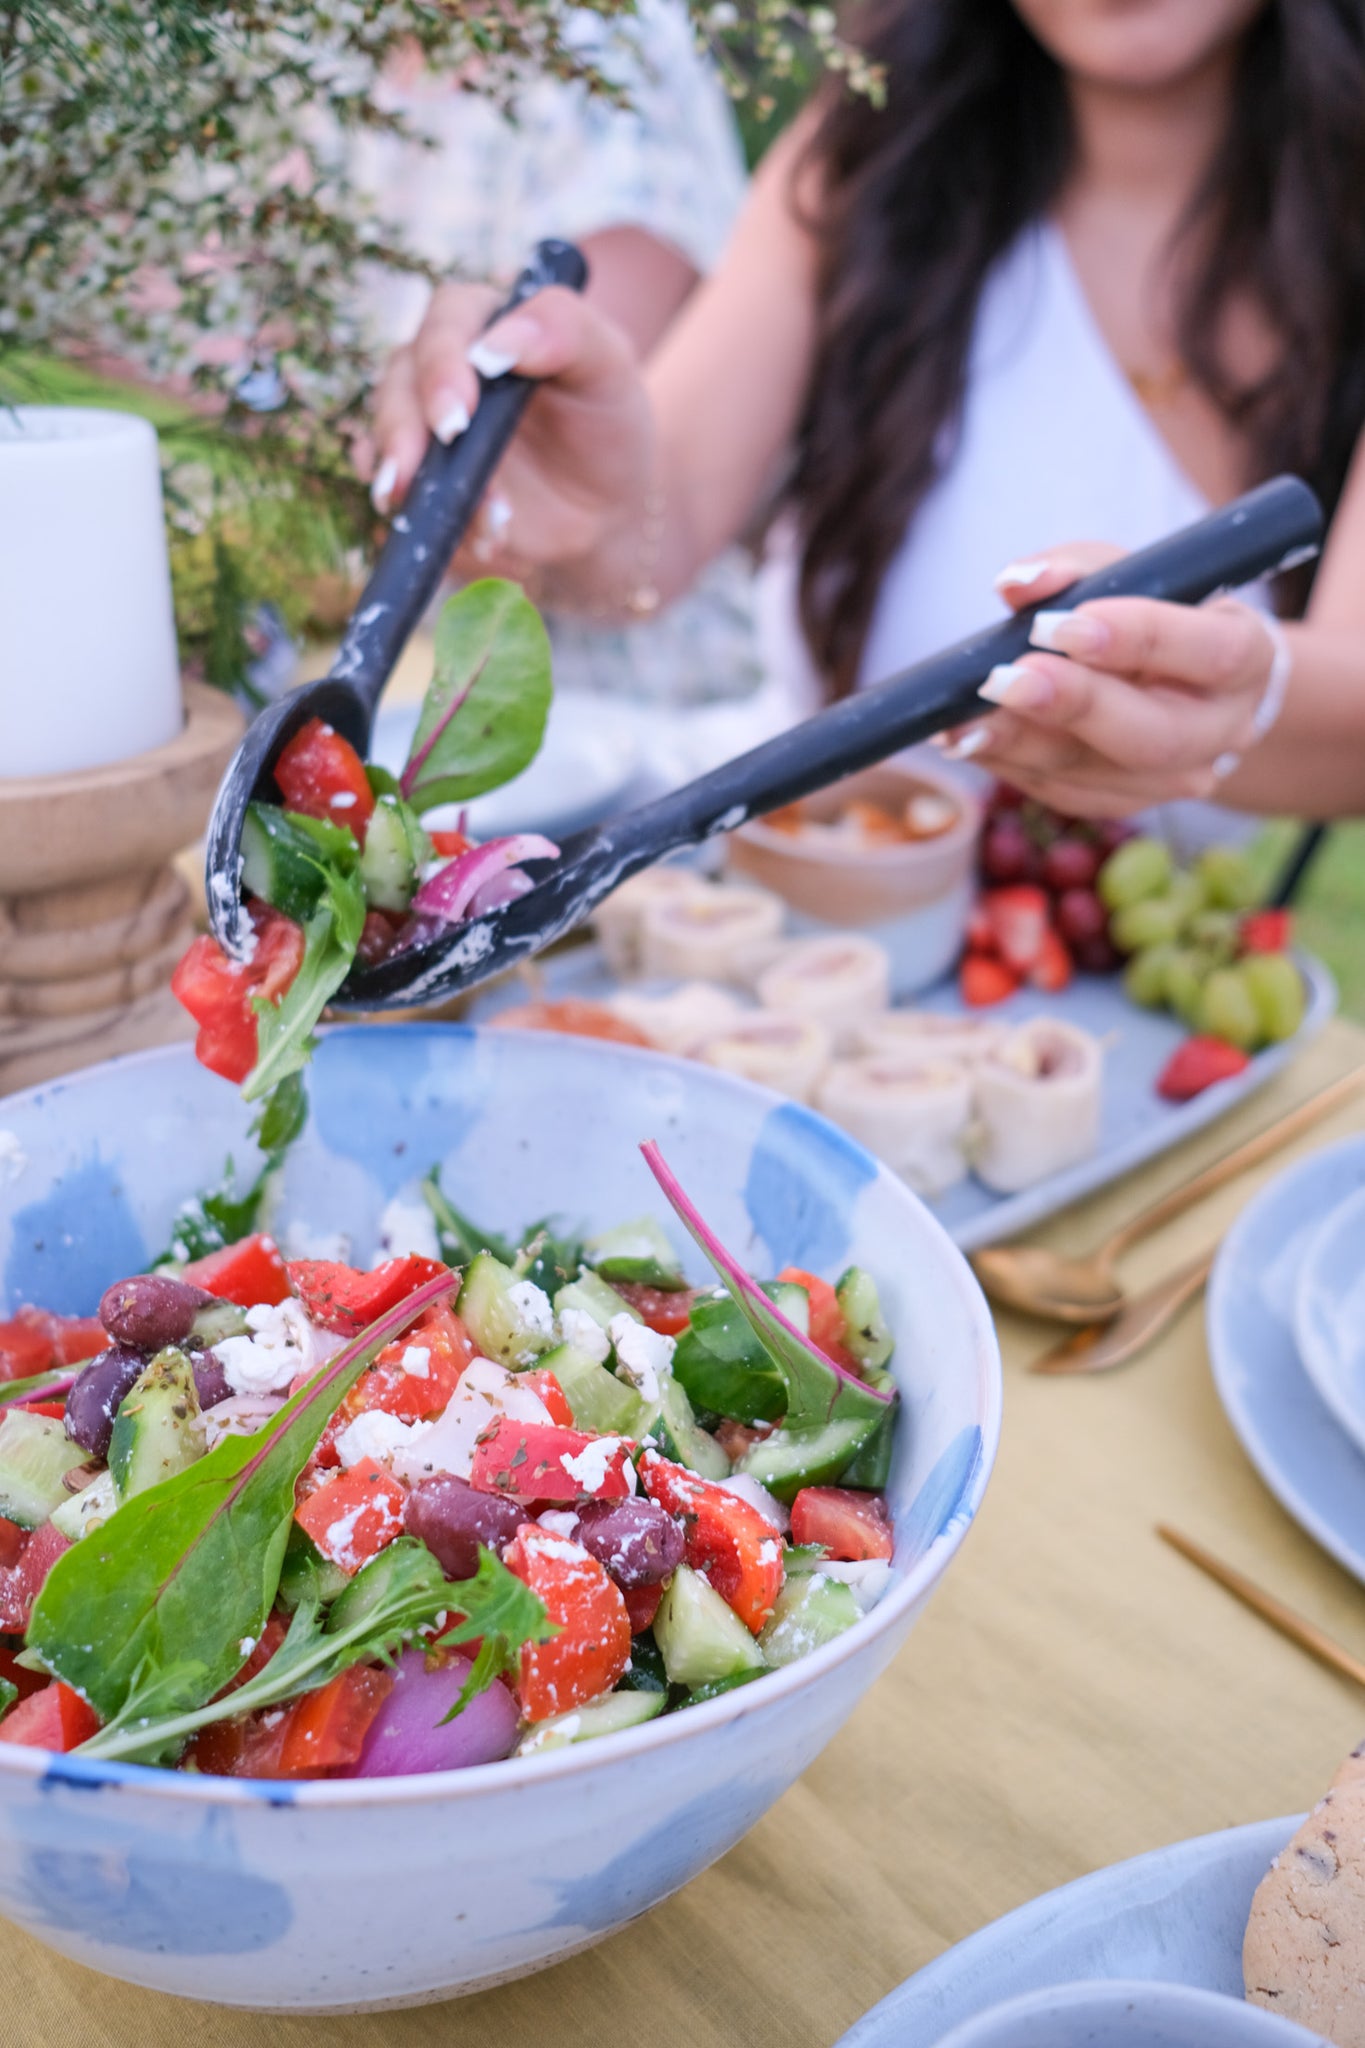 Woman serving a Greek Salad by Soul Origin Catering in a handmade blue and white stoneware bowl by Palinopsia ceramics